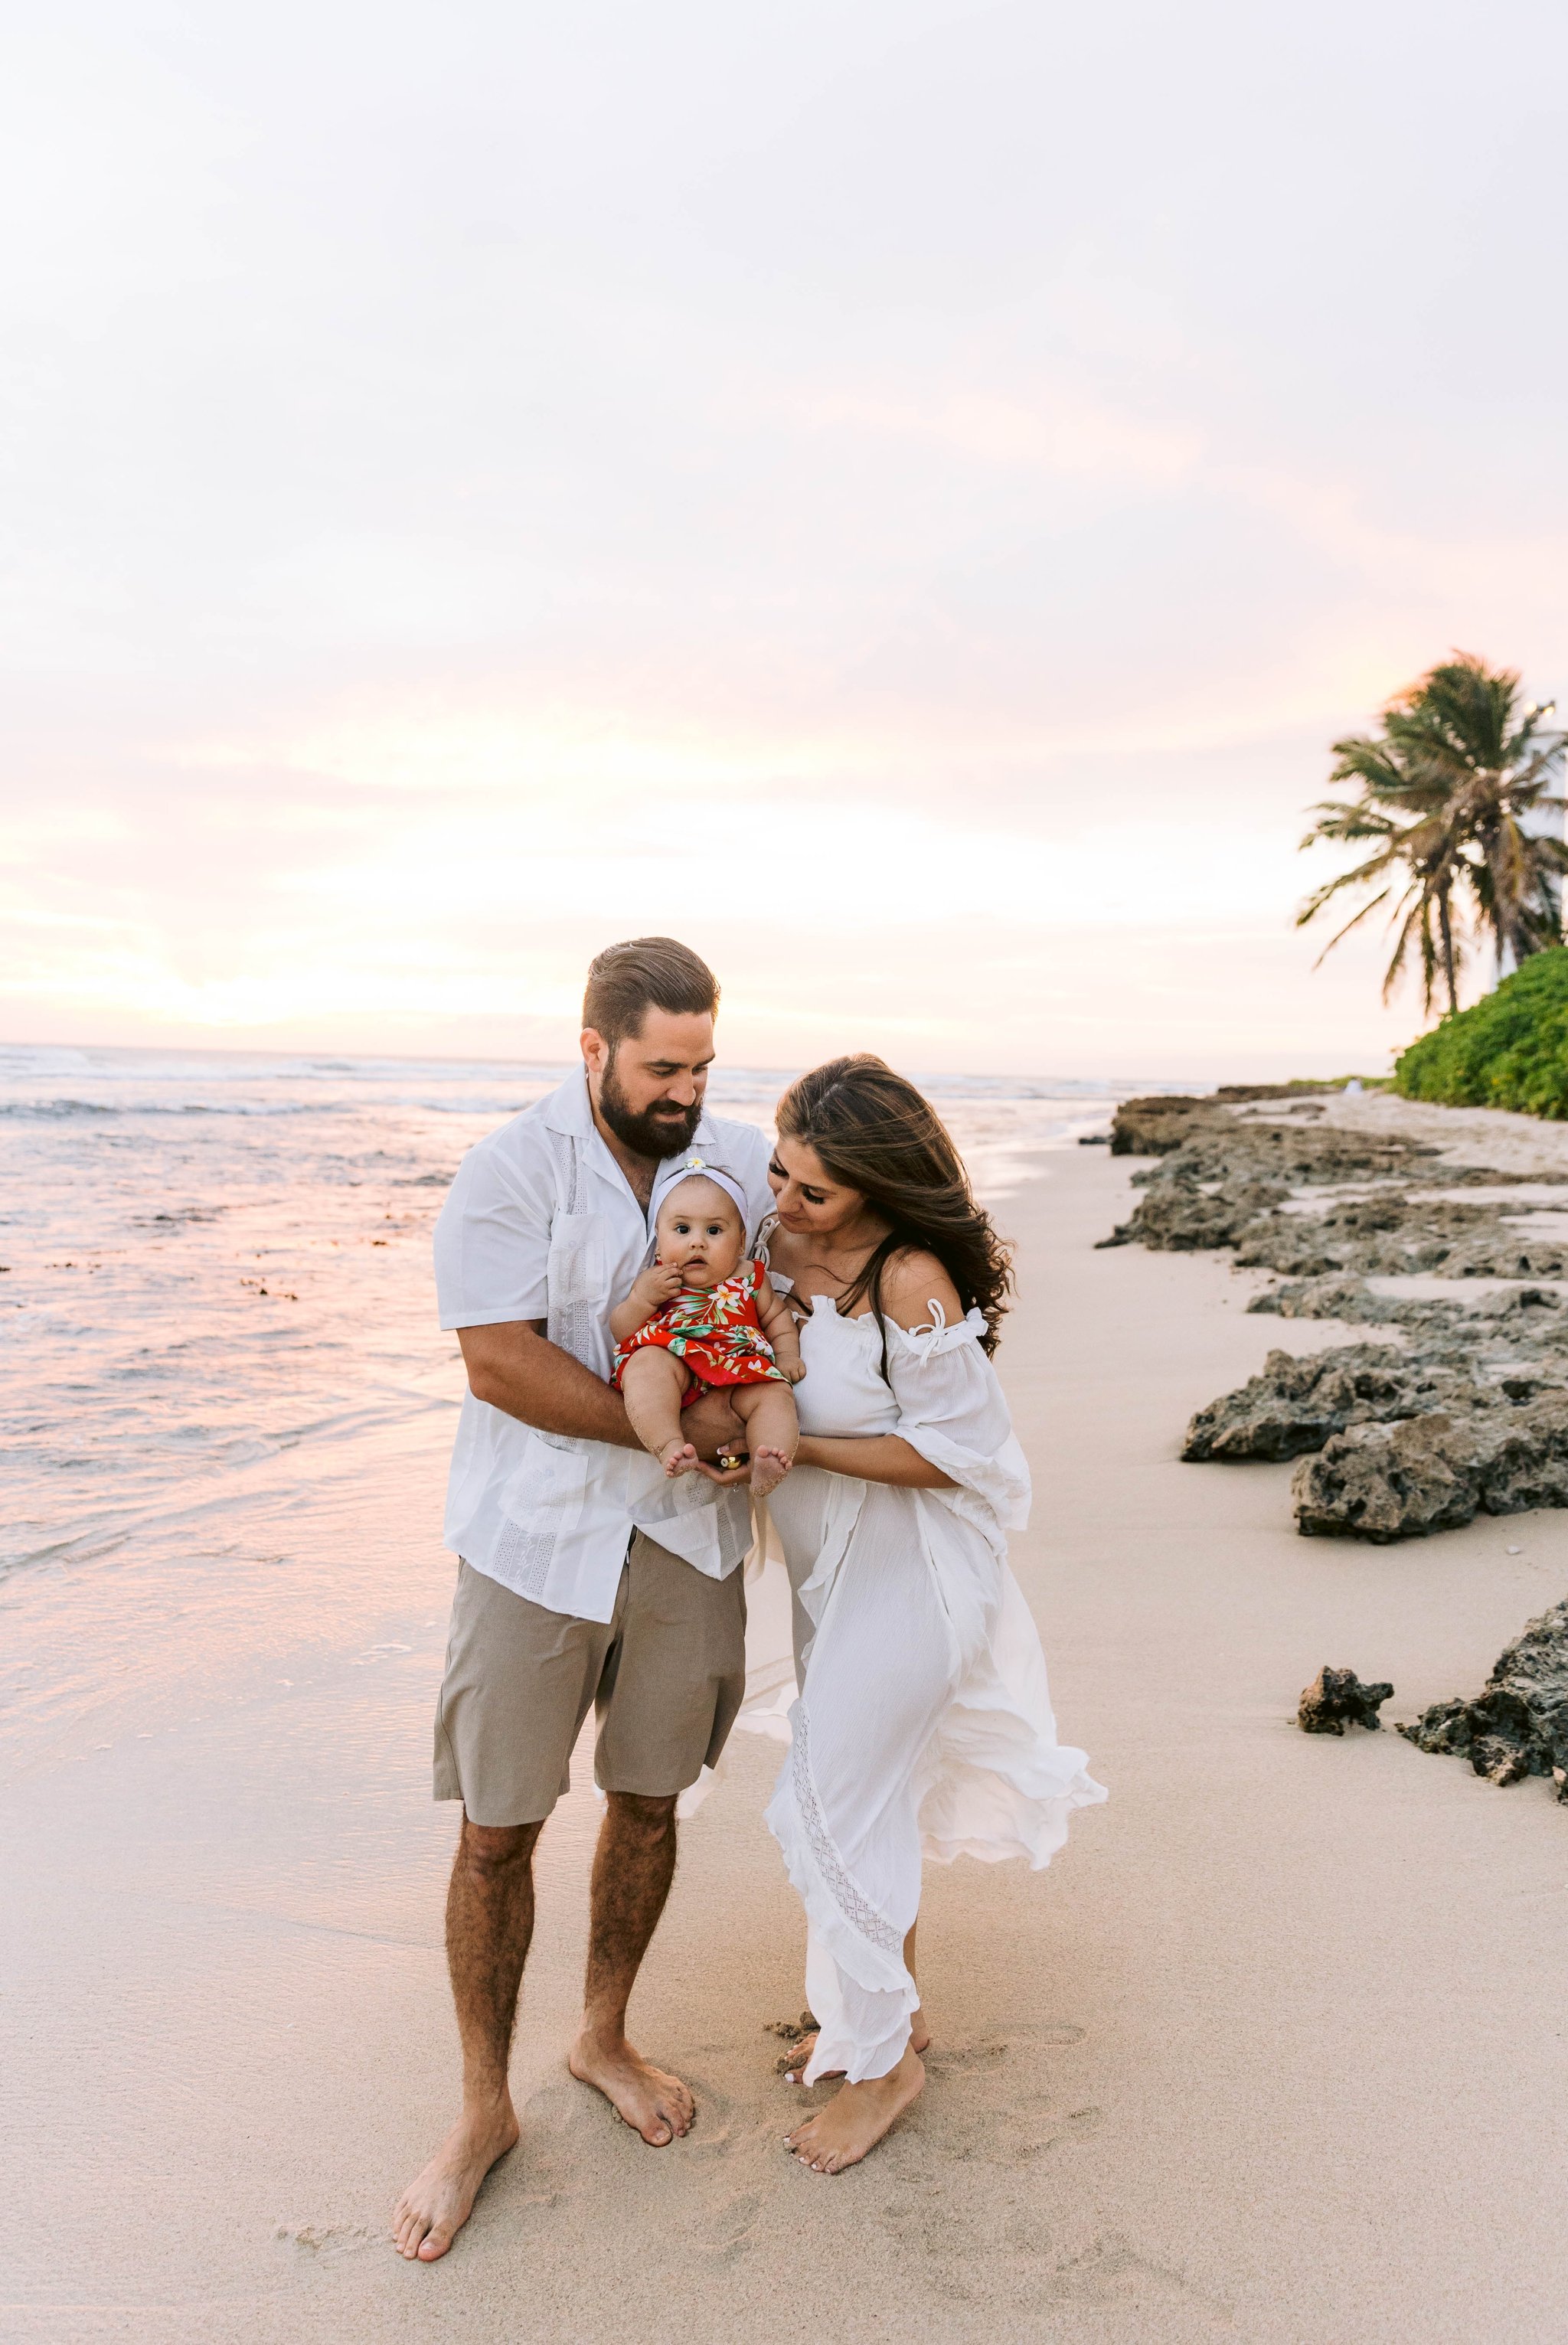 Sunset Family Photography Session at Barbers Point Beach Park, Oahu Hawaii